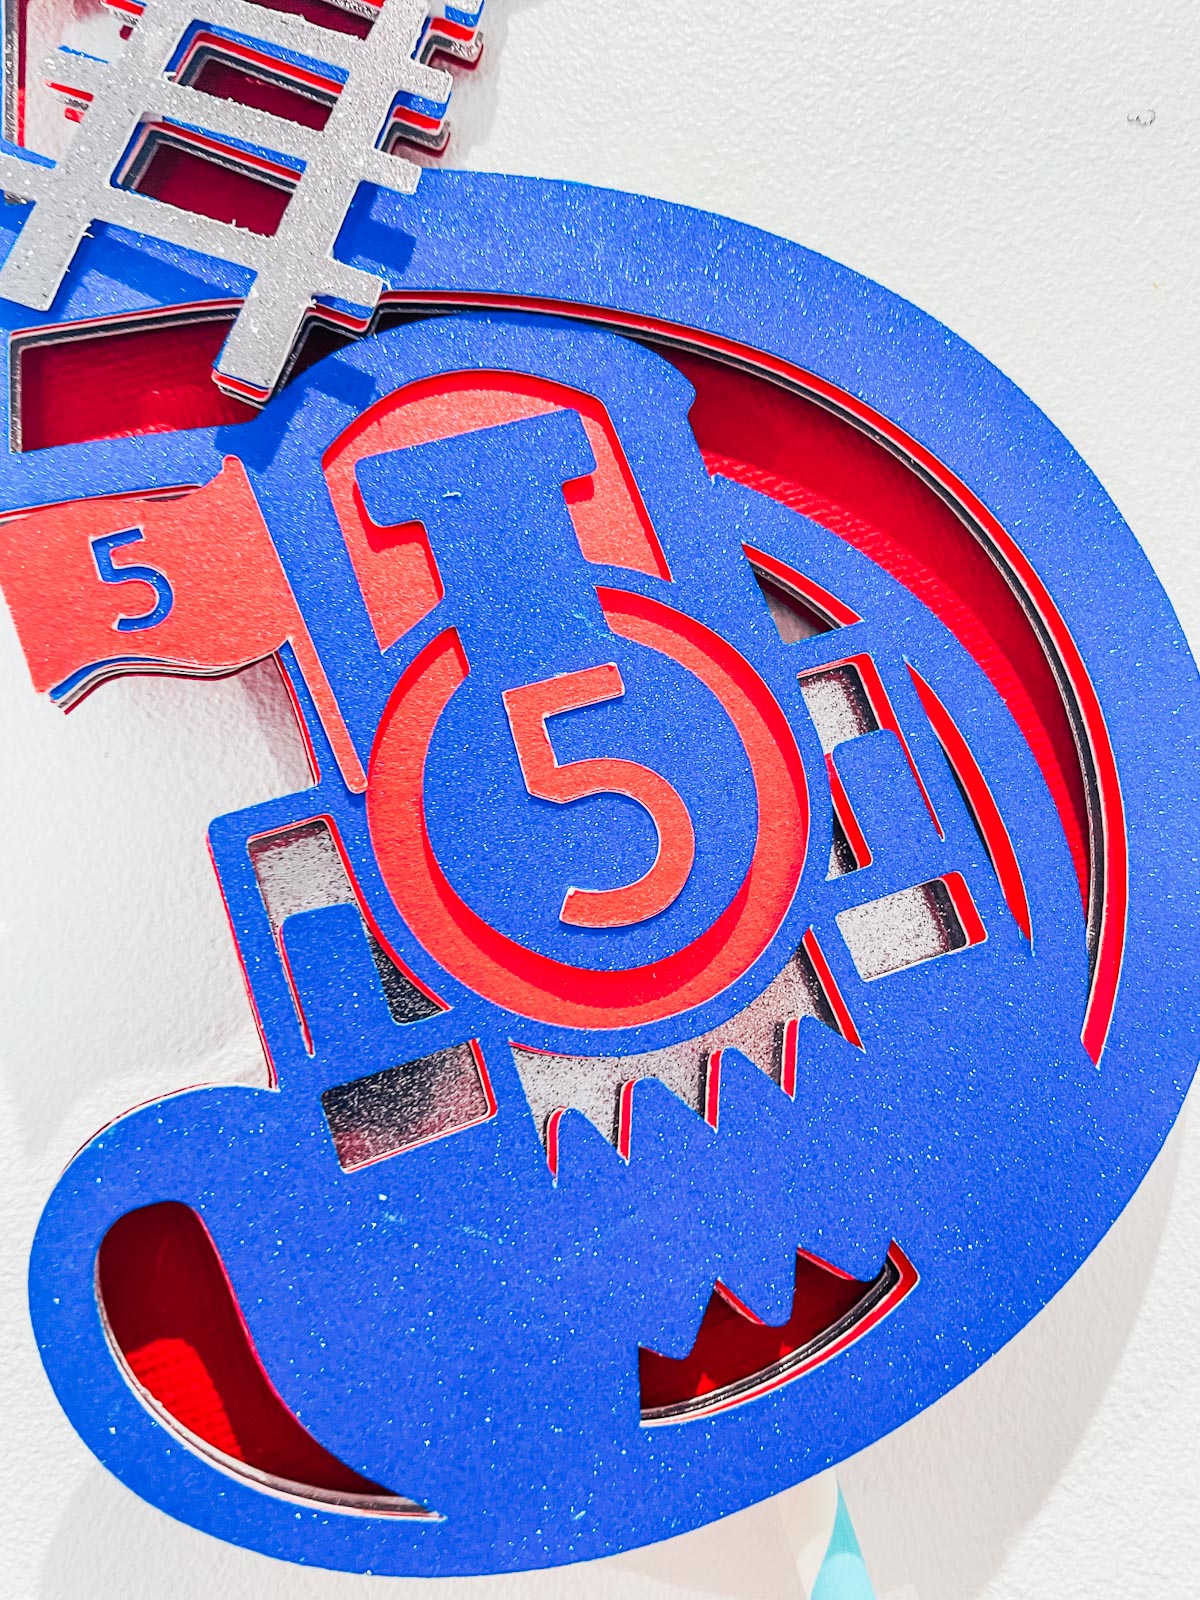 Themed letters and numbers for kids crafting